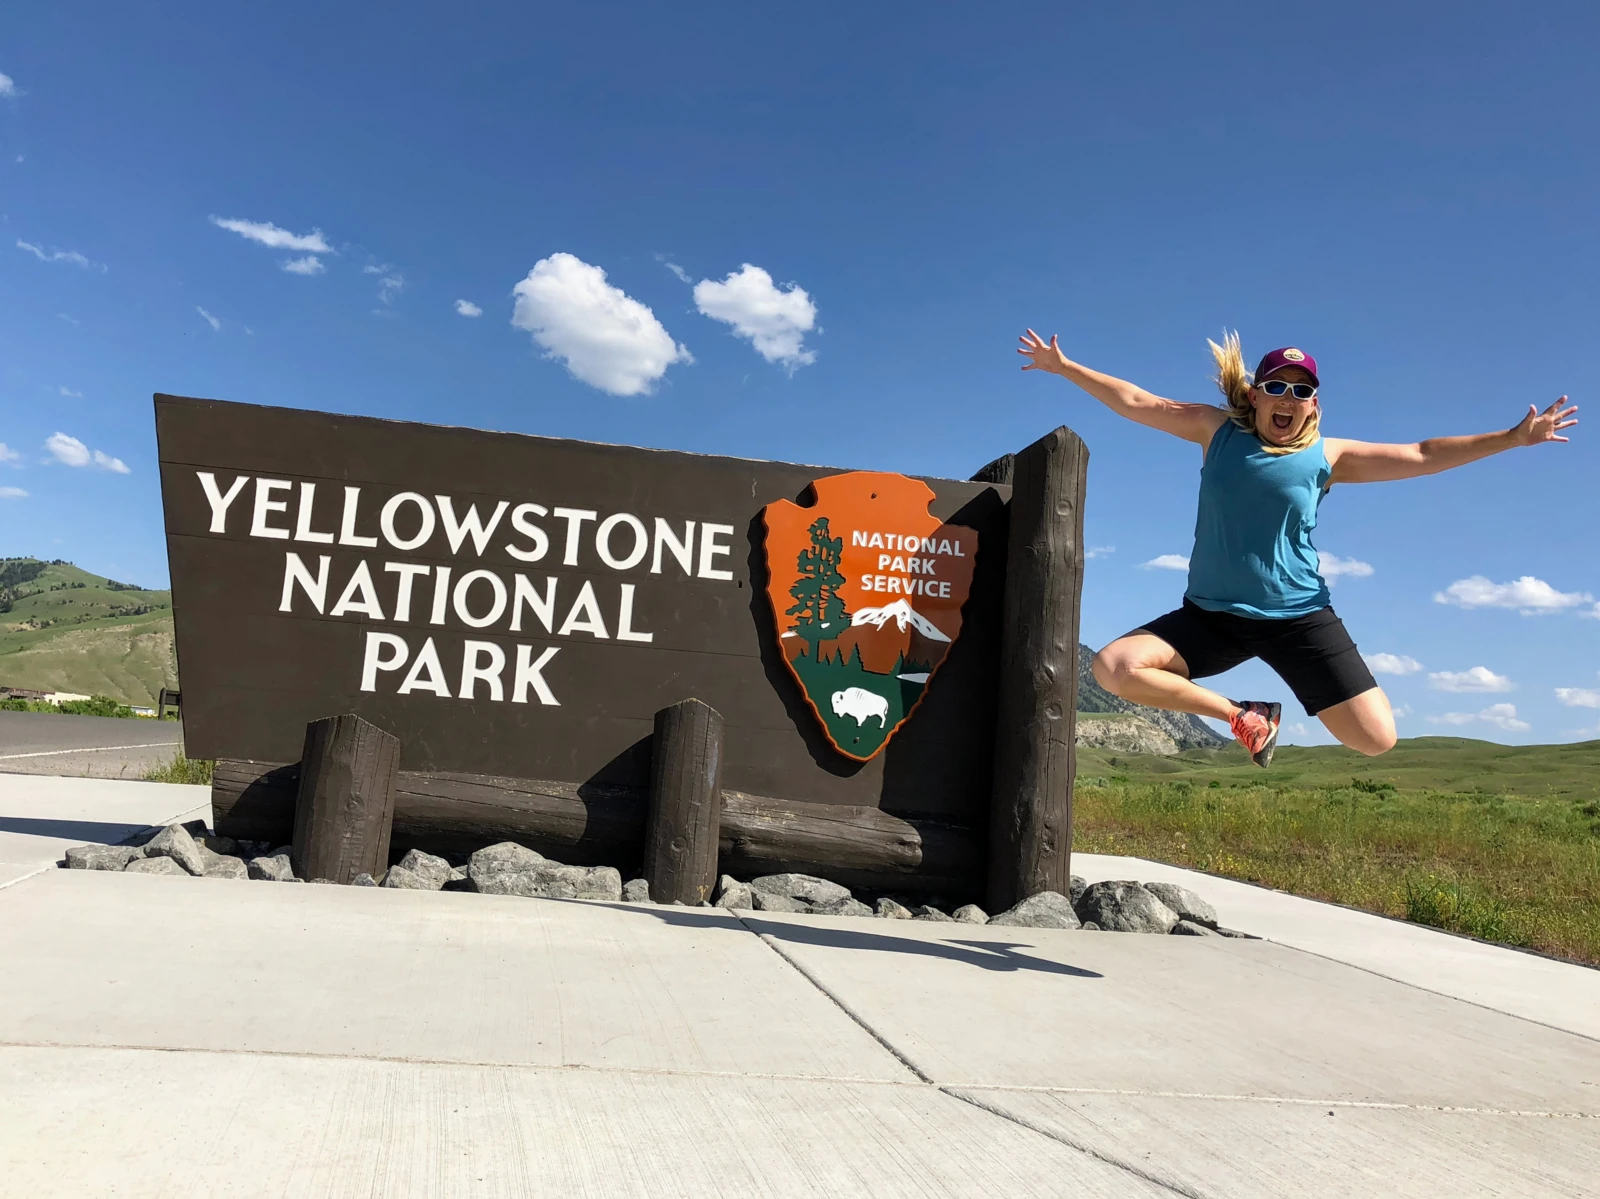 Where to Stay in Yellowstone (Inside the Park) 2023 - Yellowstone Trips